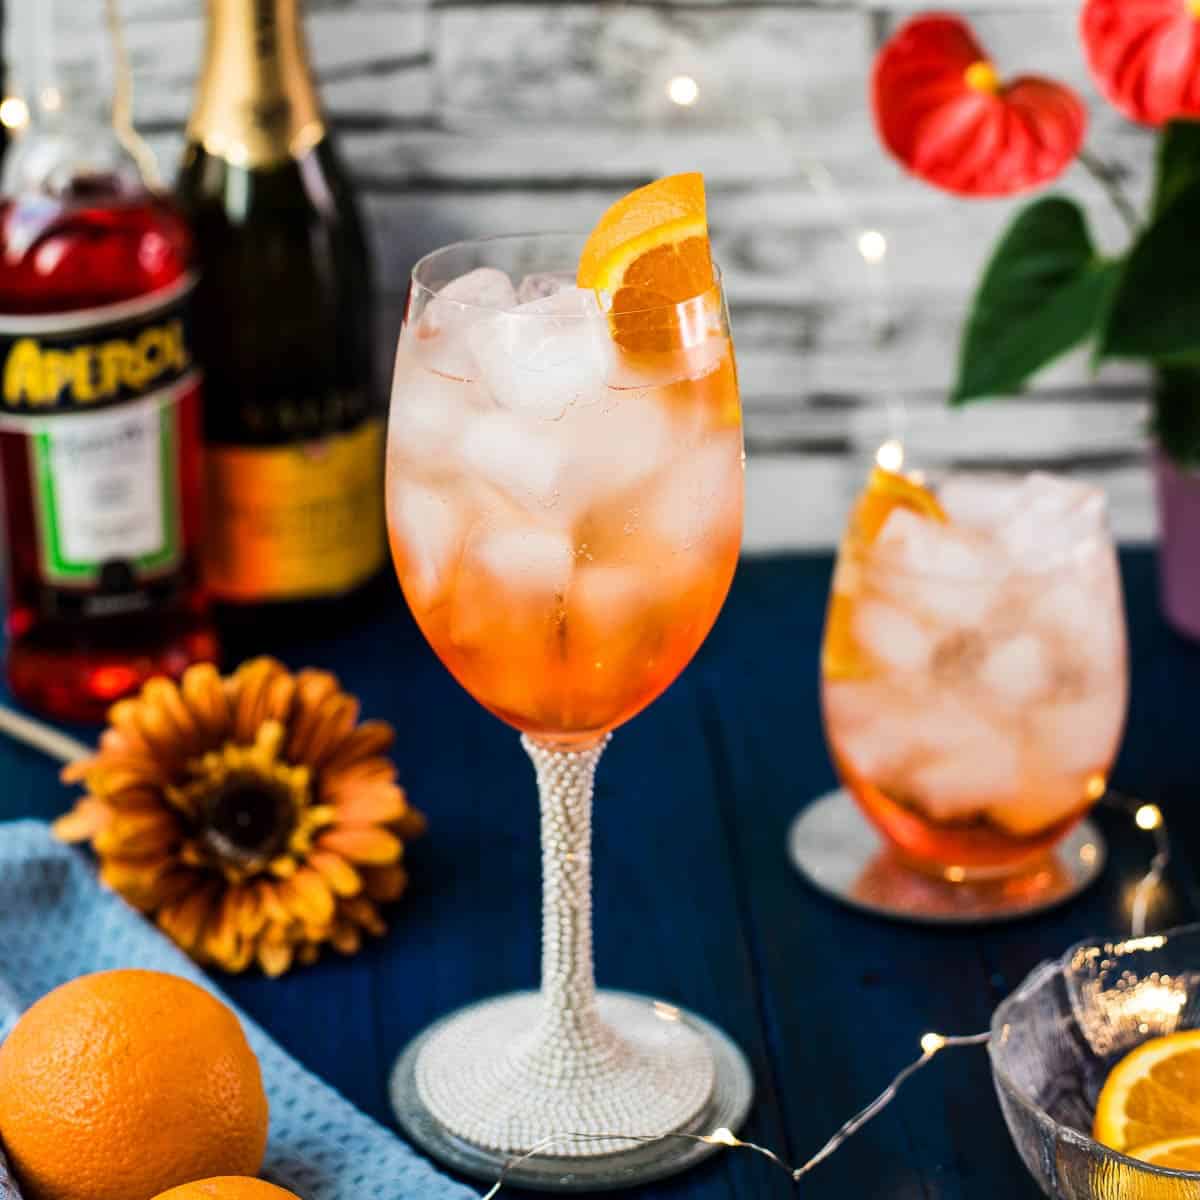 How to make an Aperol Spritz?